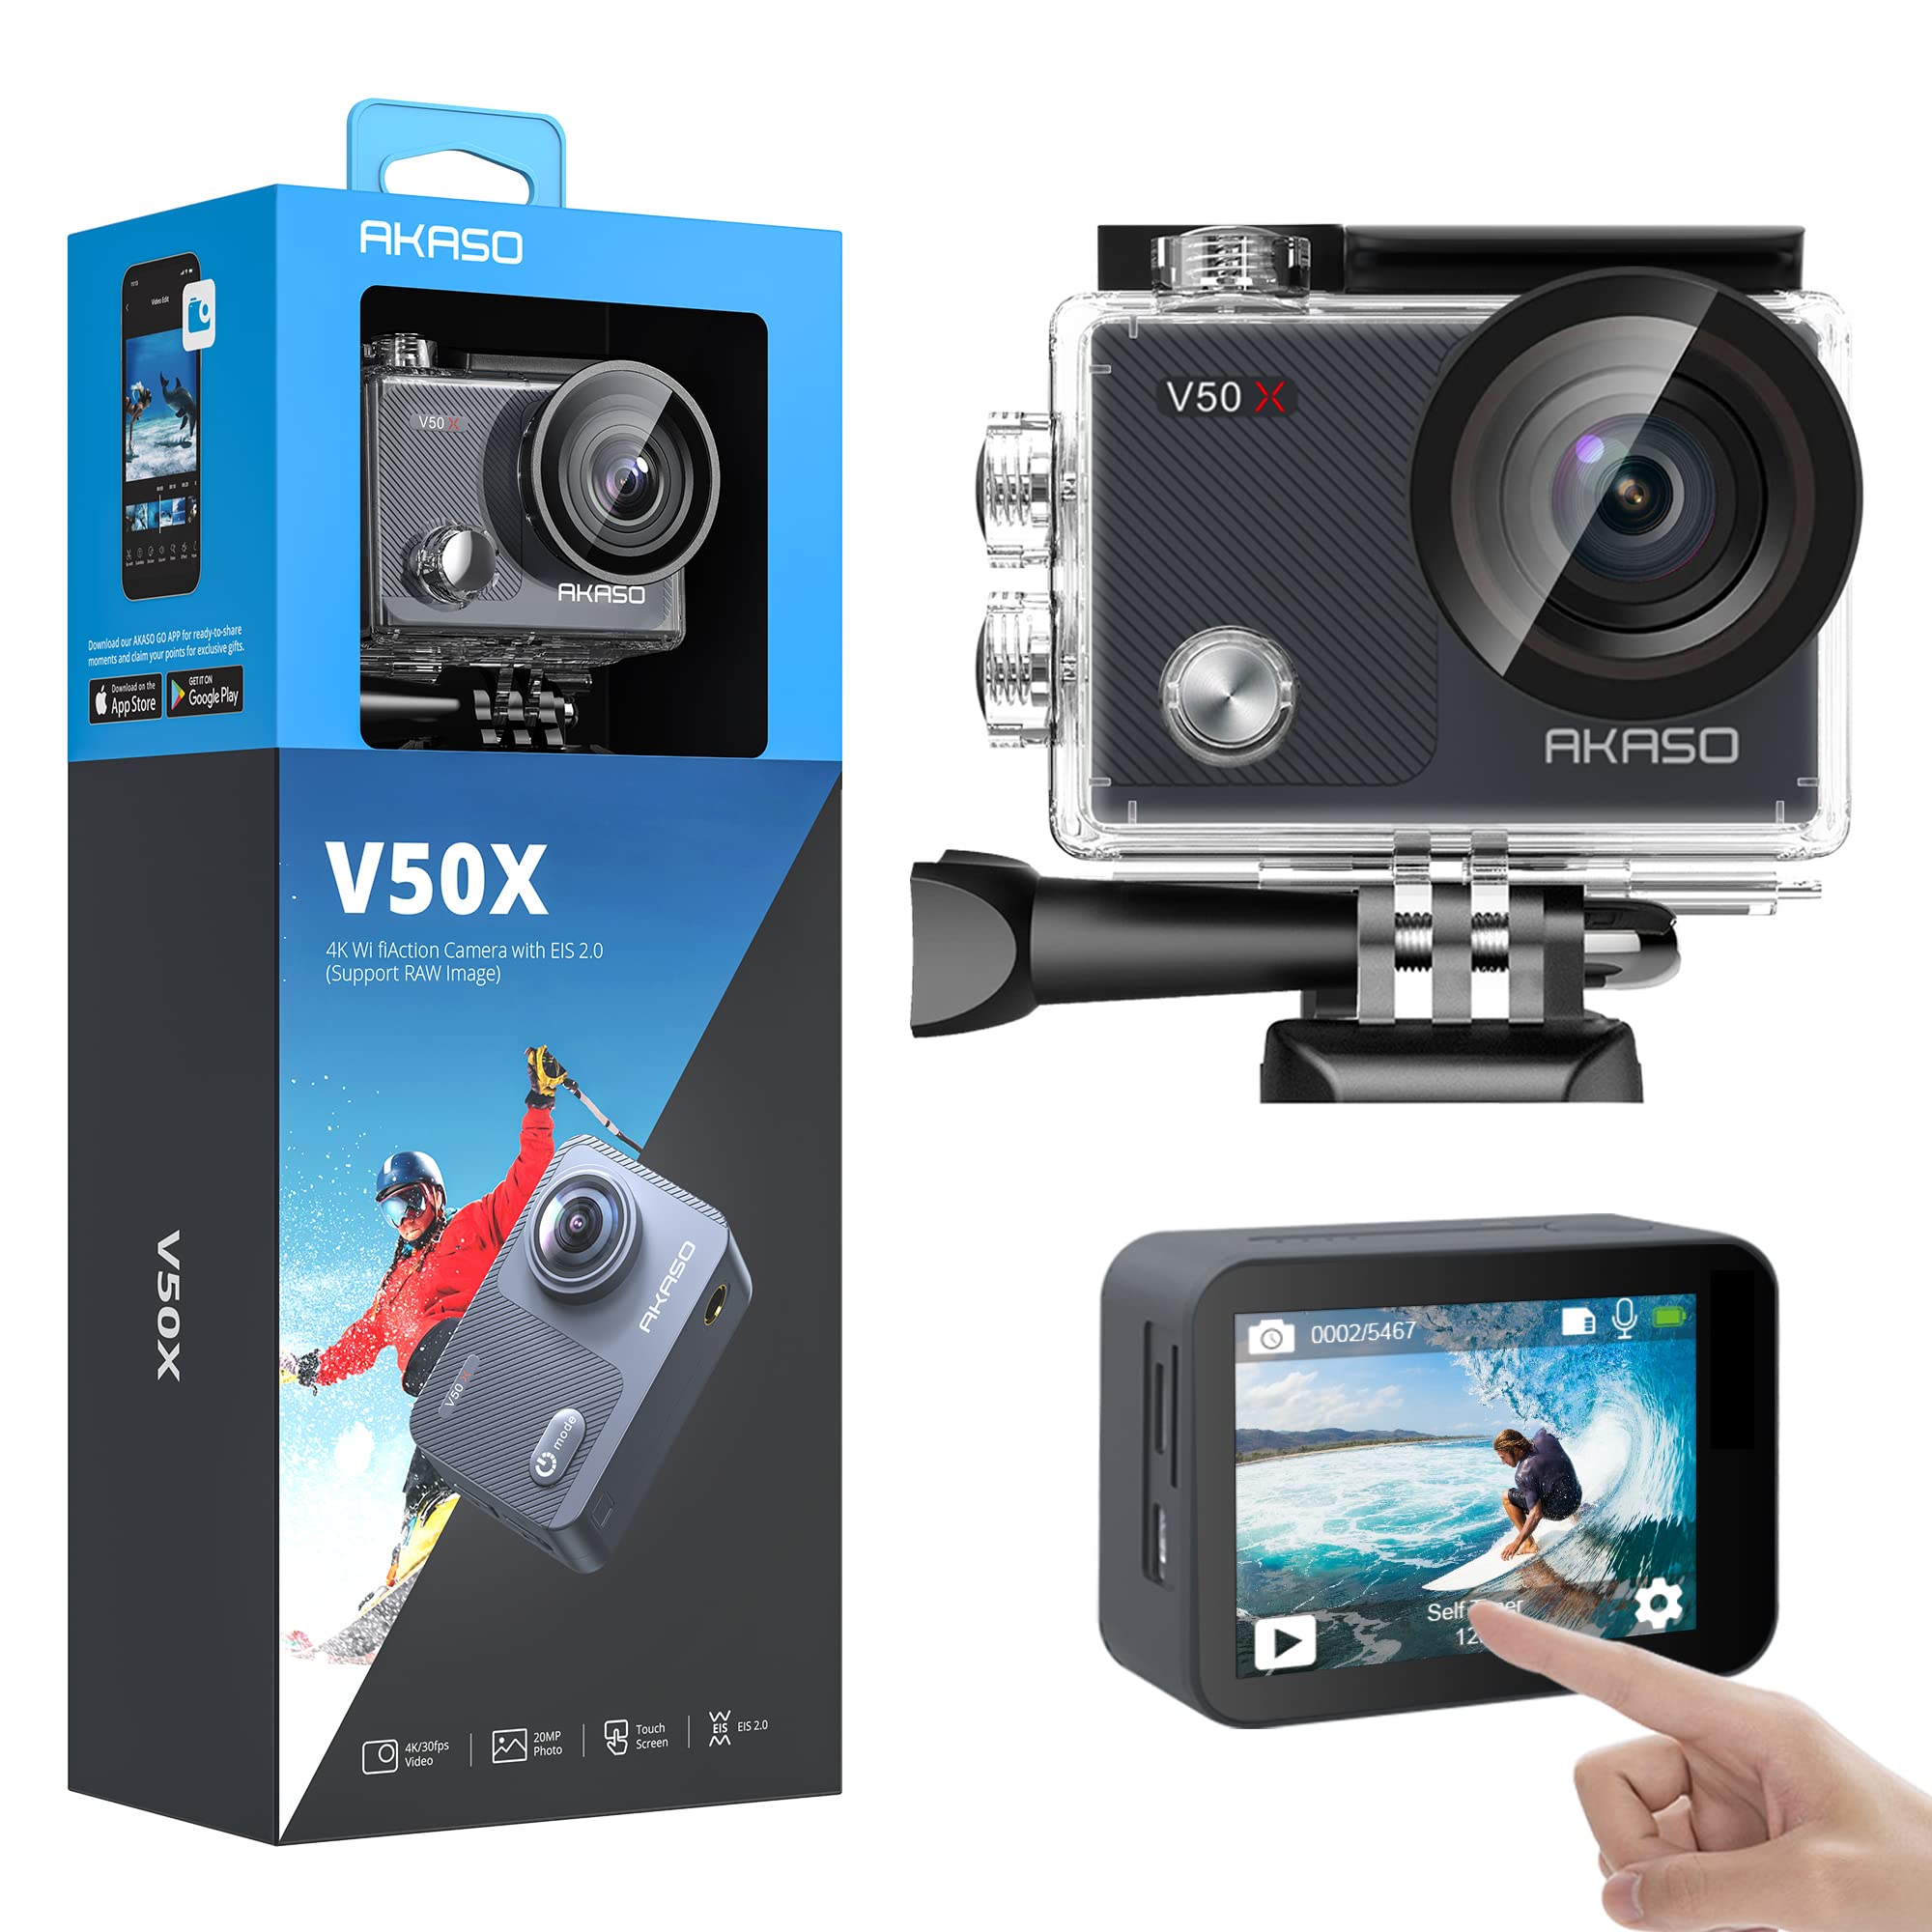 AKASO V50X Native 4K30fps WiFi Action Camera With EIS Touch Screen 4X Zoom  Web Camera 131 Feet Waterproof Camera Support External Mic Remote Control Sports  Camera With Helmet Accessories Kit